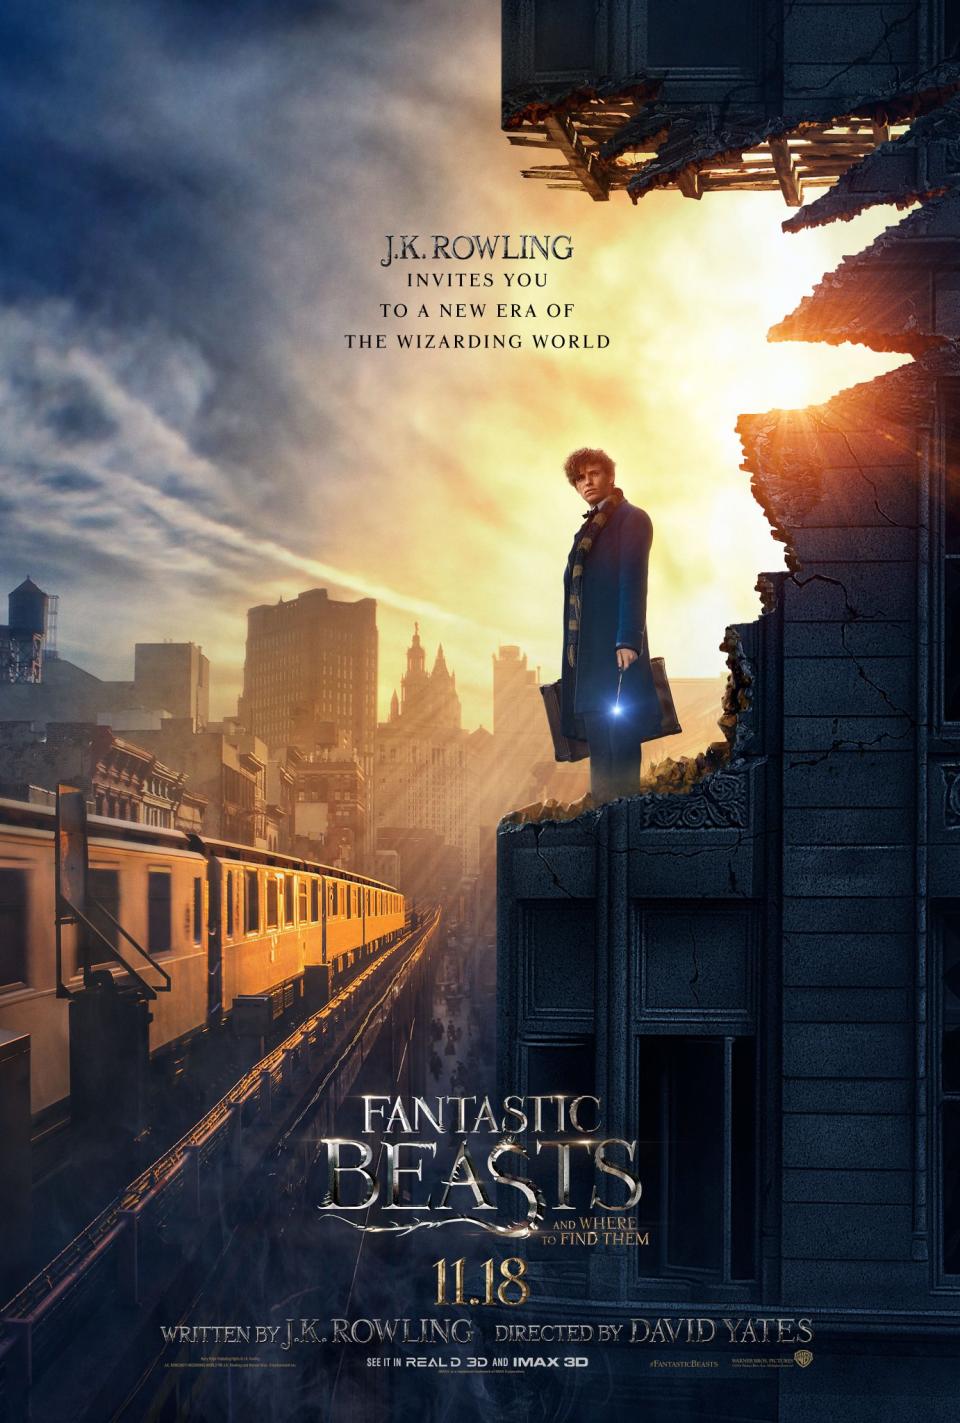 10. Fantastic Beasts and Where To Find Them